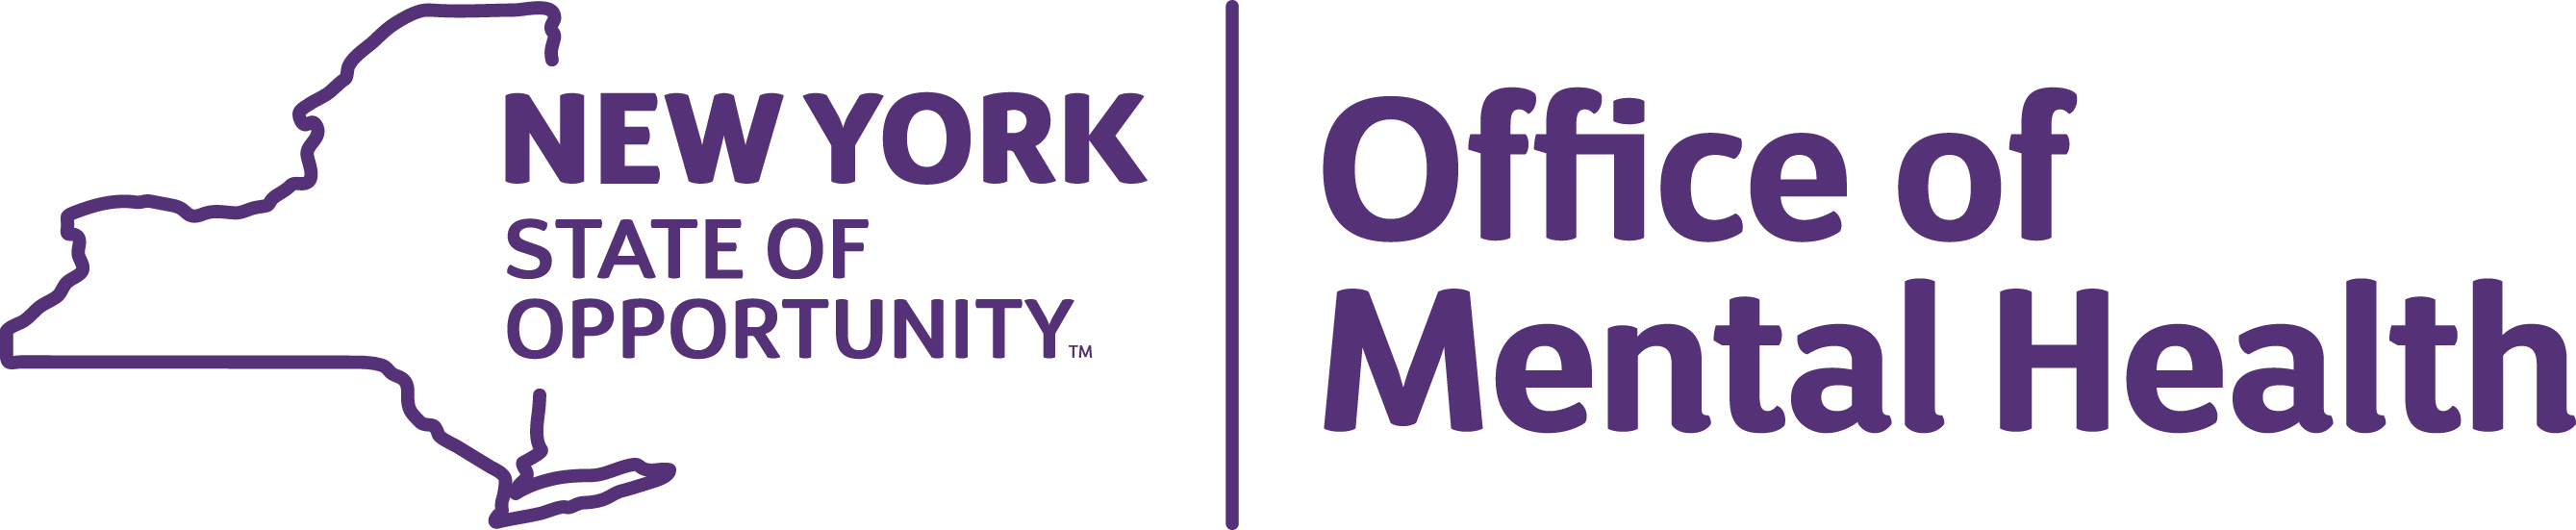 New-York-State-Office-of-Mental-Health-logo